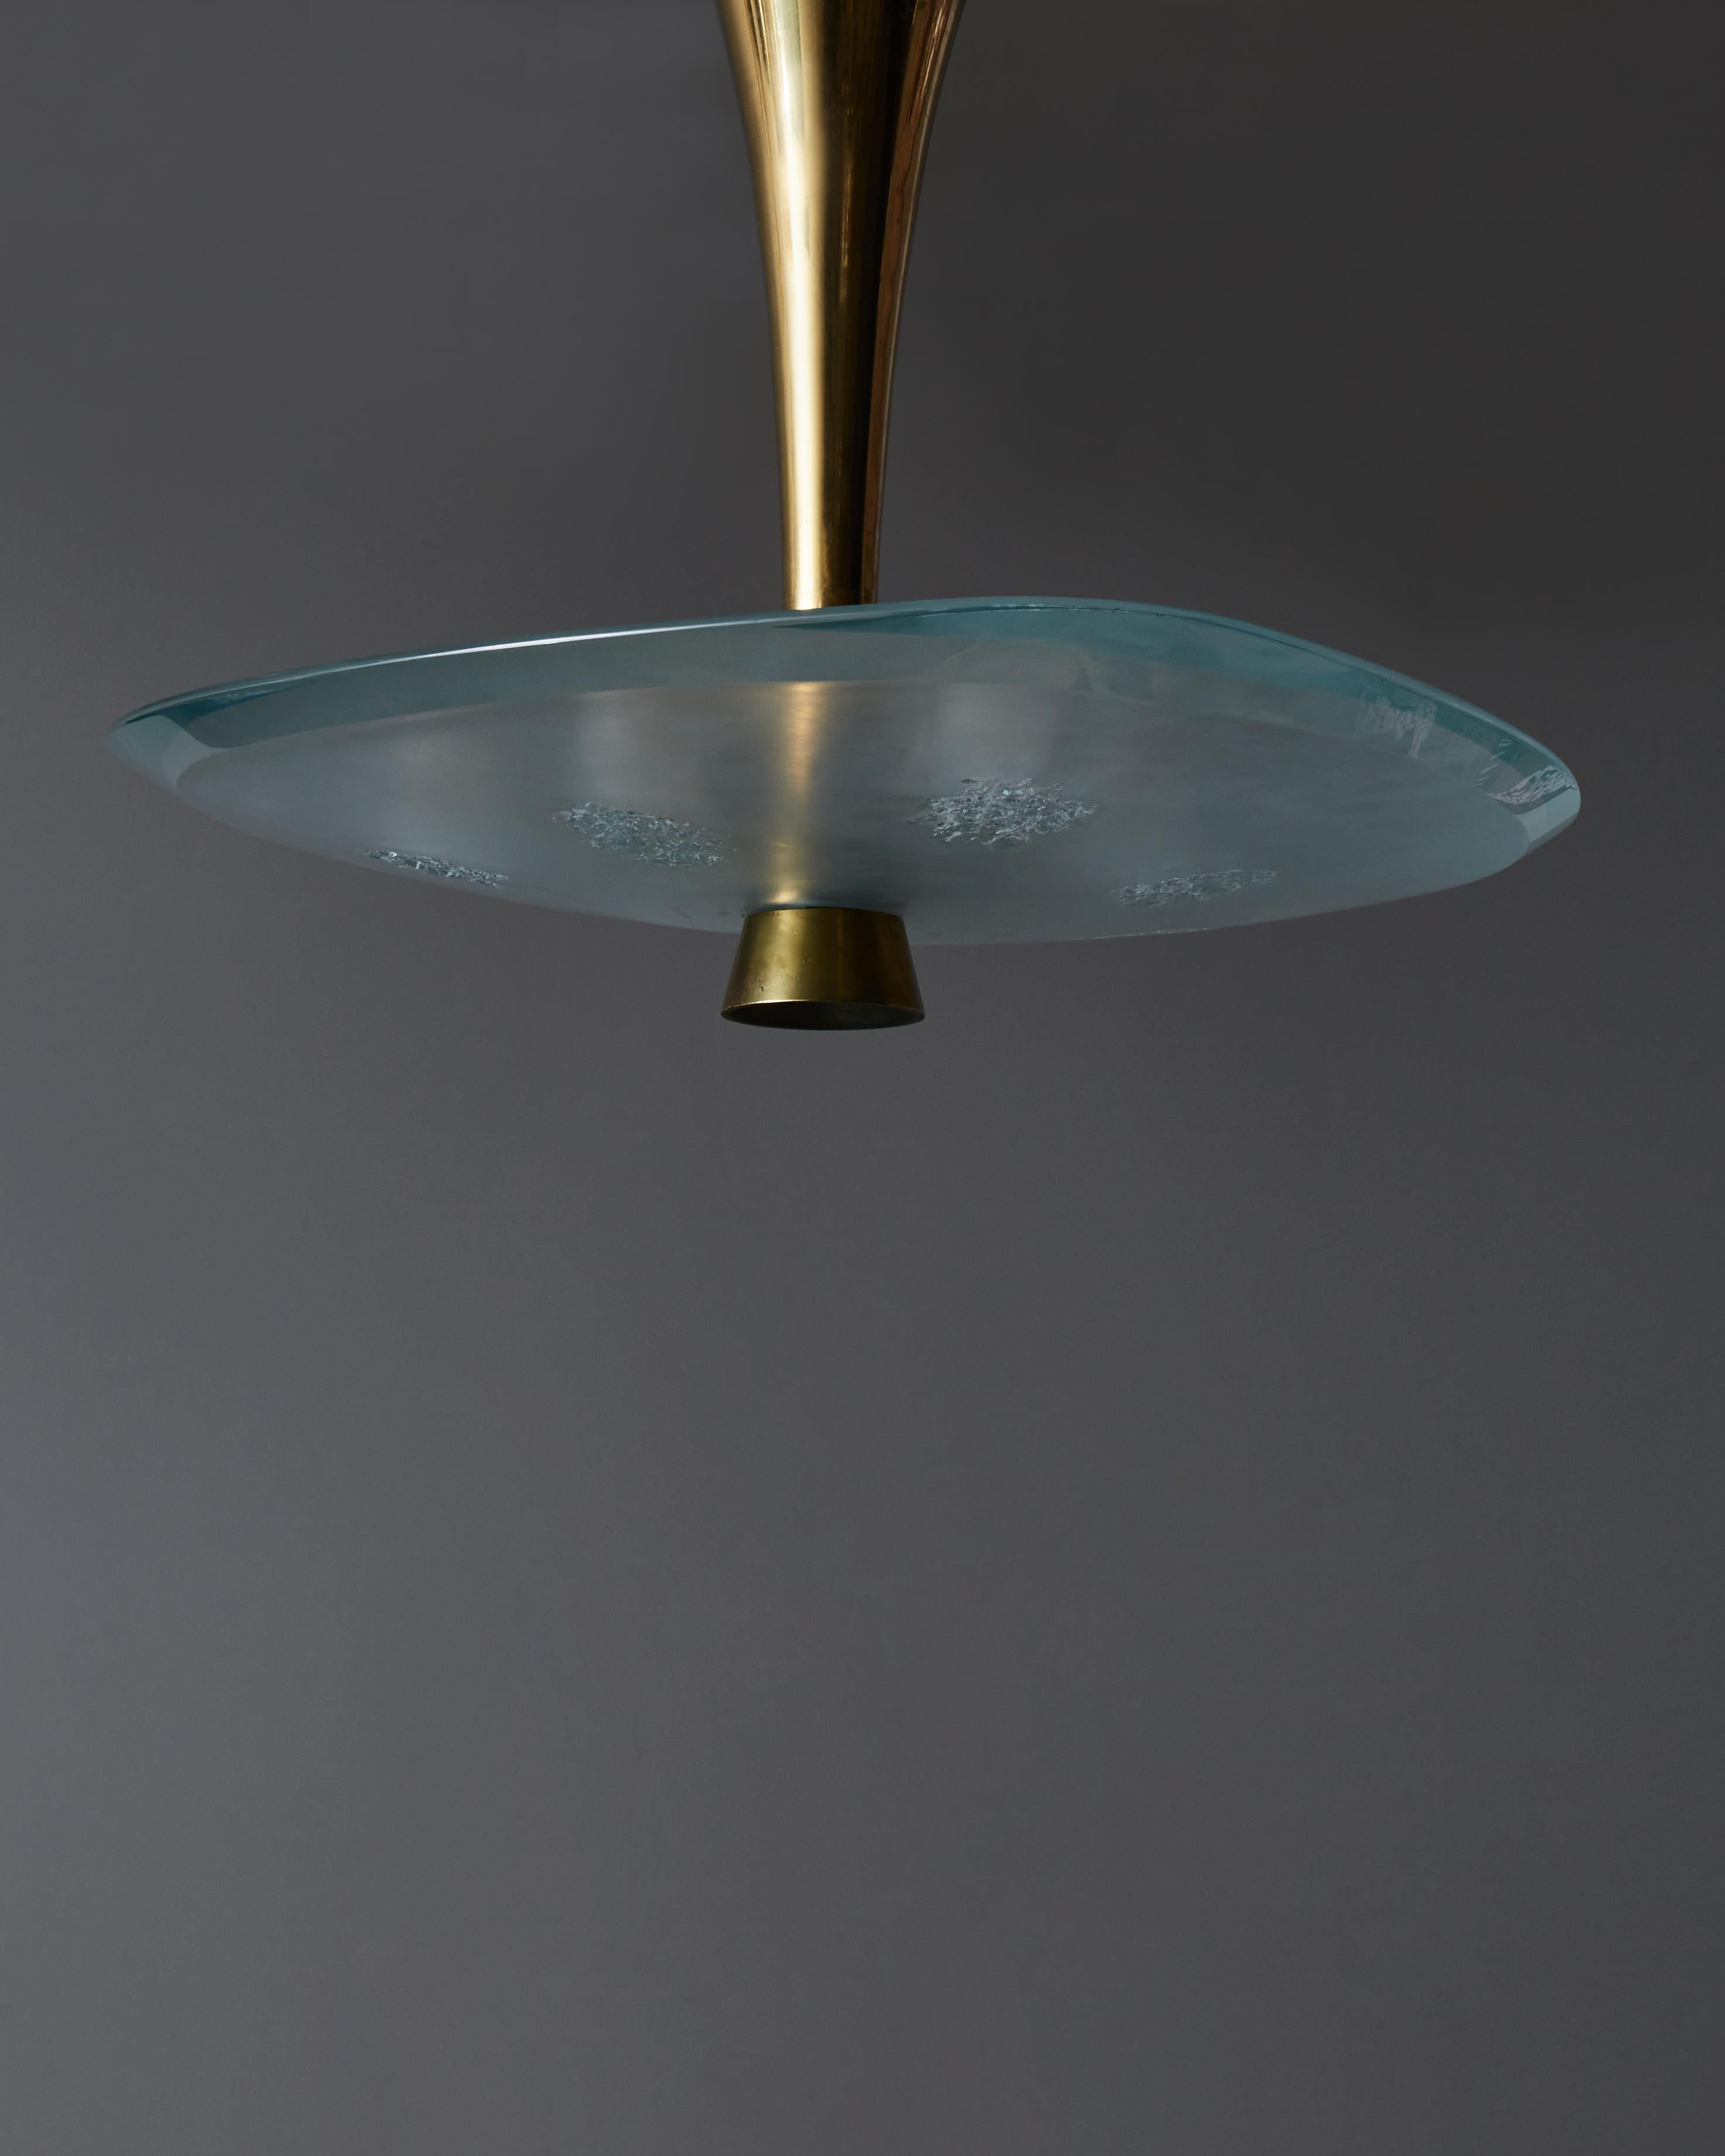 Beautiful and rare suspension model 1748 designed by Max ingrand in 1957 for Fontana Arte. The suspension is made of a free shaped acid frosted glass diffuser with six chiselled glass areas that are aligned and positioned under the lamp holders and